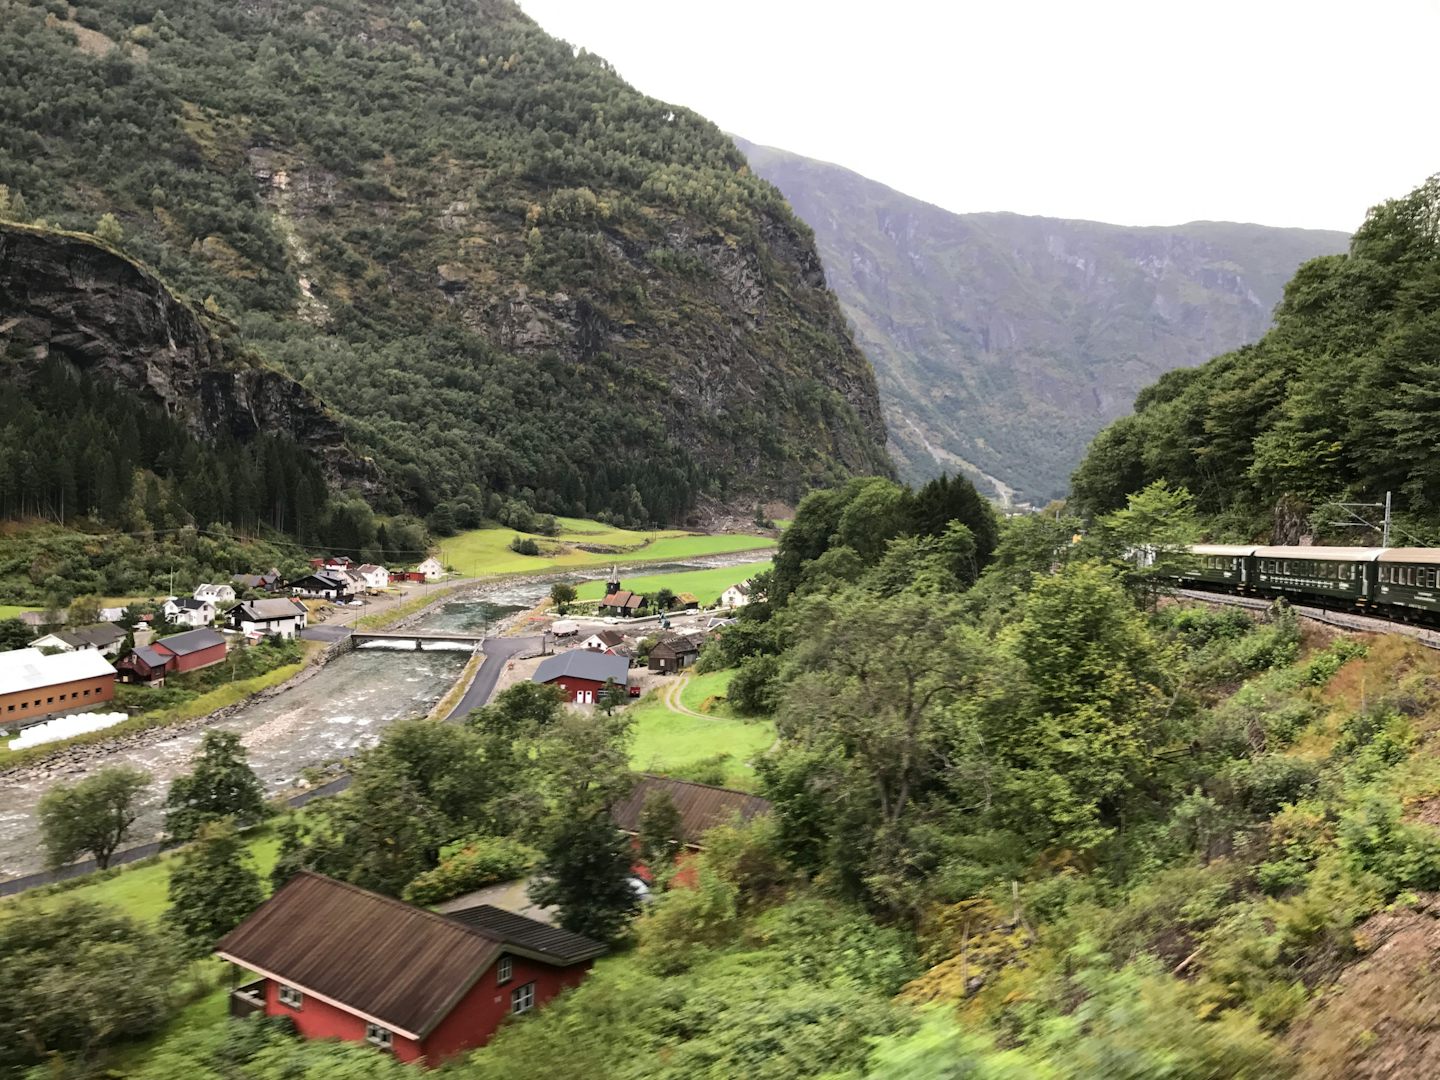 Taken from the Flam railway on the first leg of Norway in a Nutshell excurs